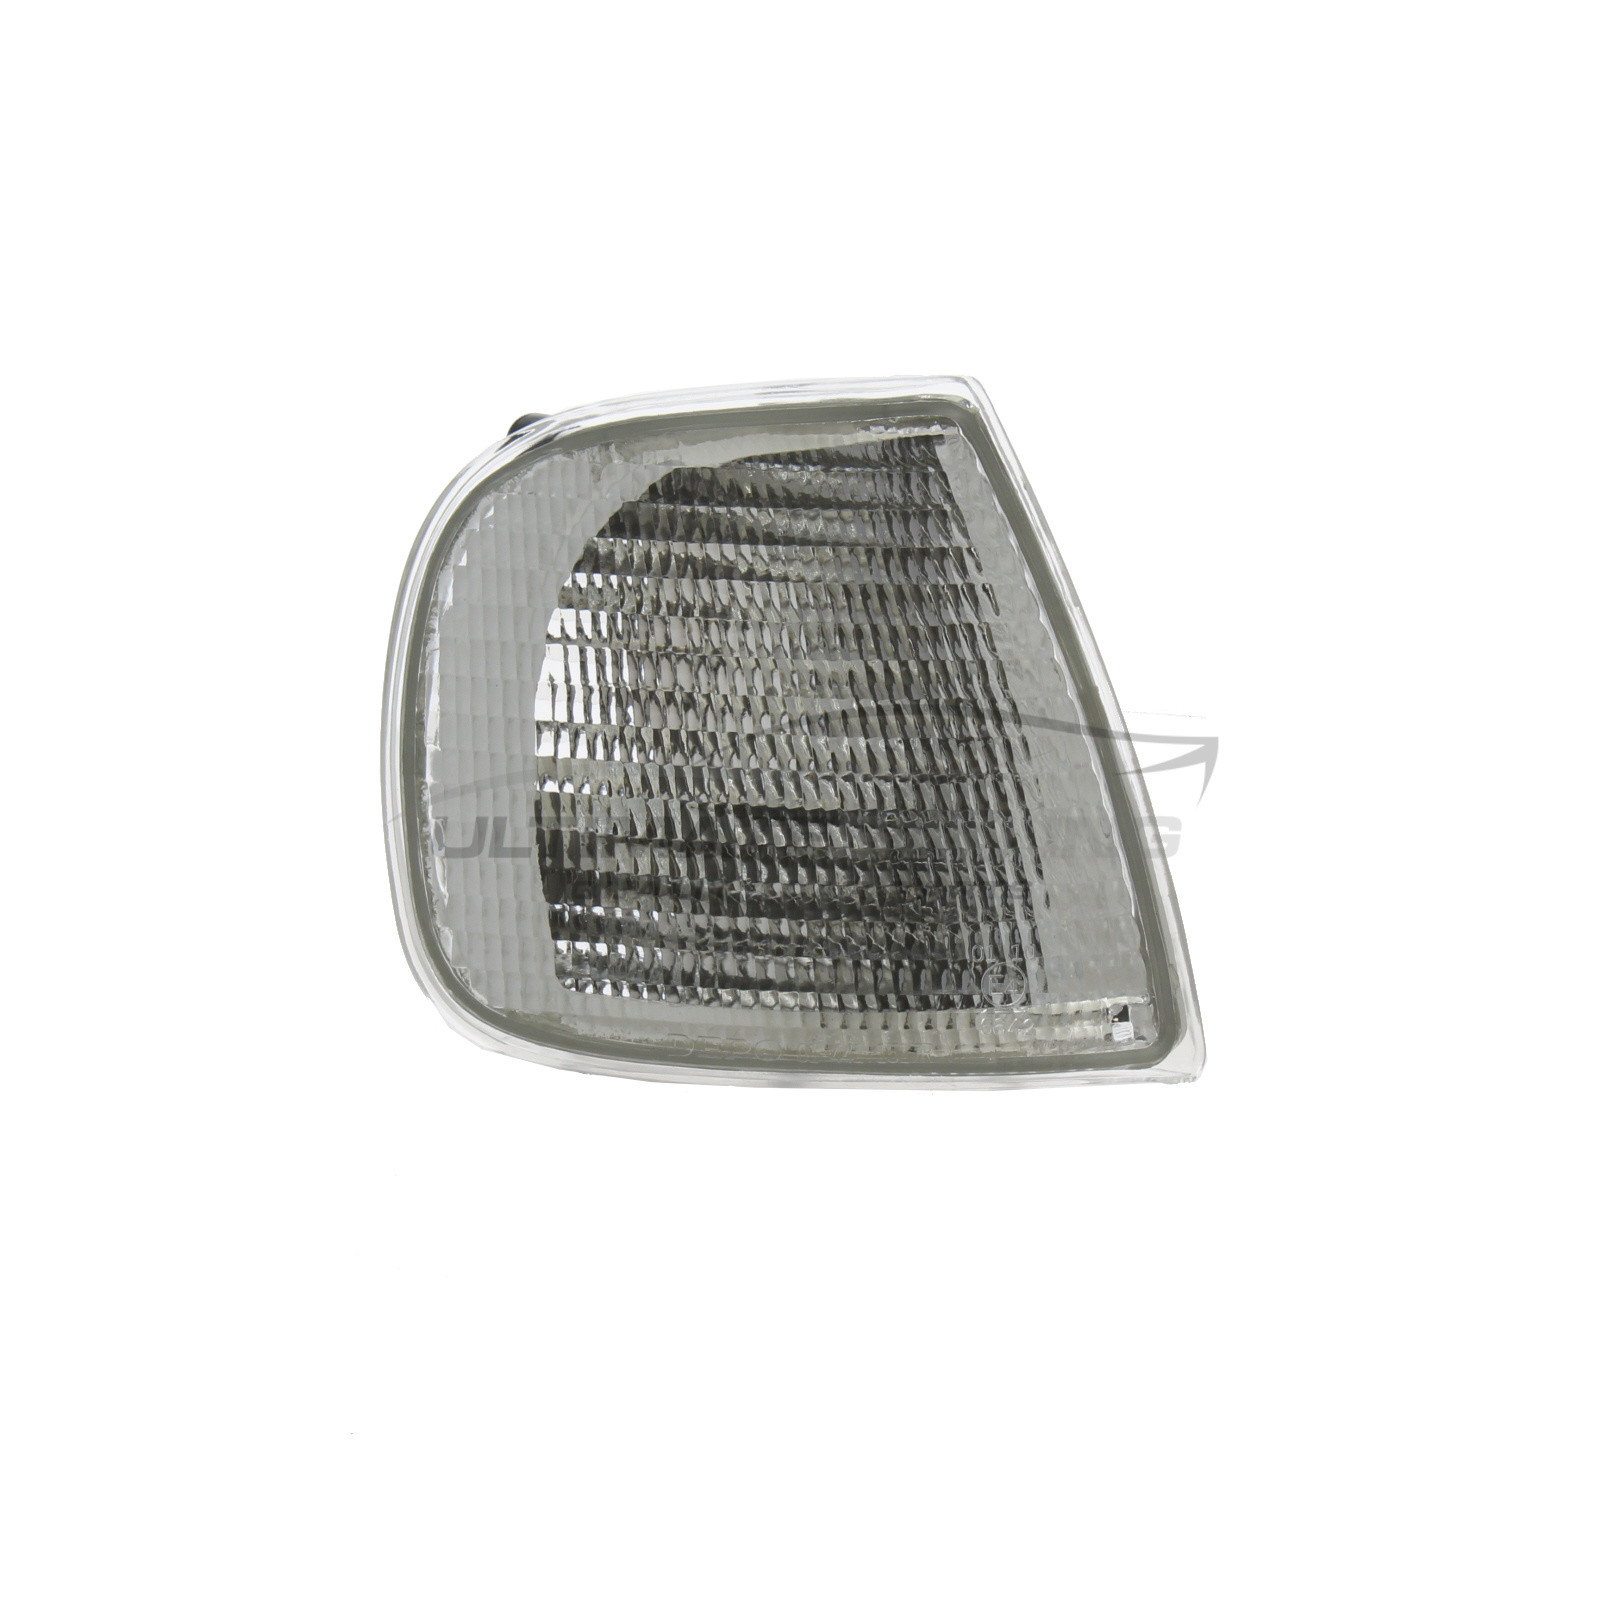 Seat Cordoba 1996-1999 / Seat Ibiza 1996-1999 / VW Caddy 1996-2004 / VW Polo 2000-2002 Clear Front Indicator Excludes Bulb Holder - Drivers Side (RH)